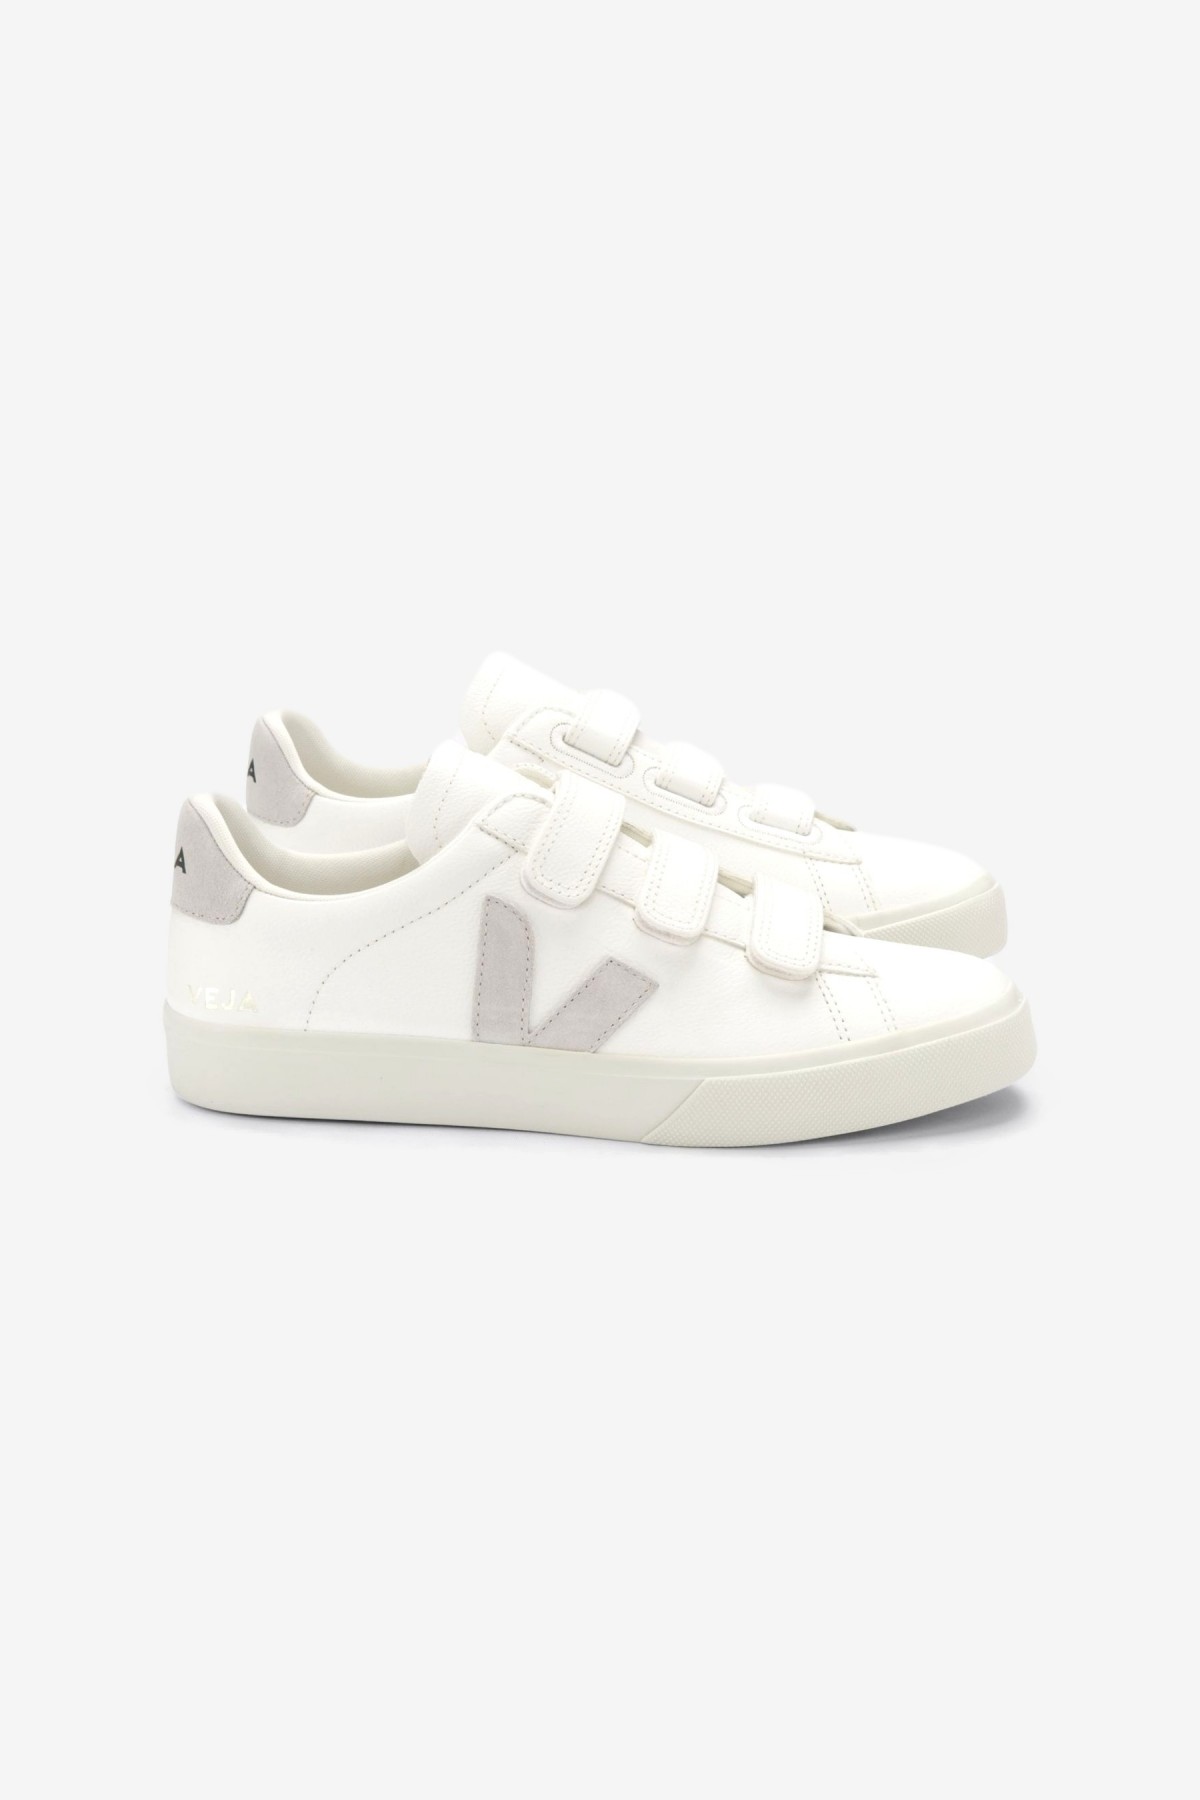 Veja Recife in Extra White Natural Leather